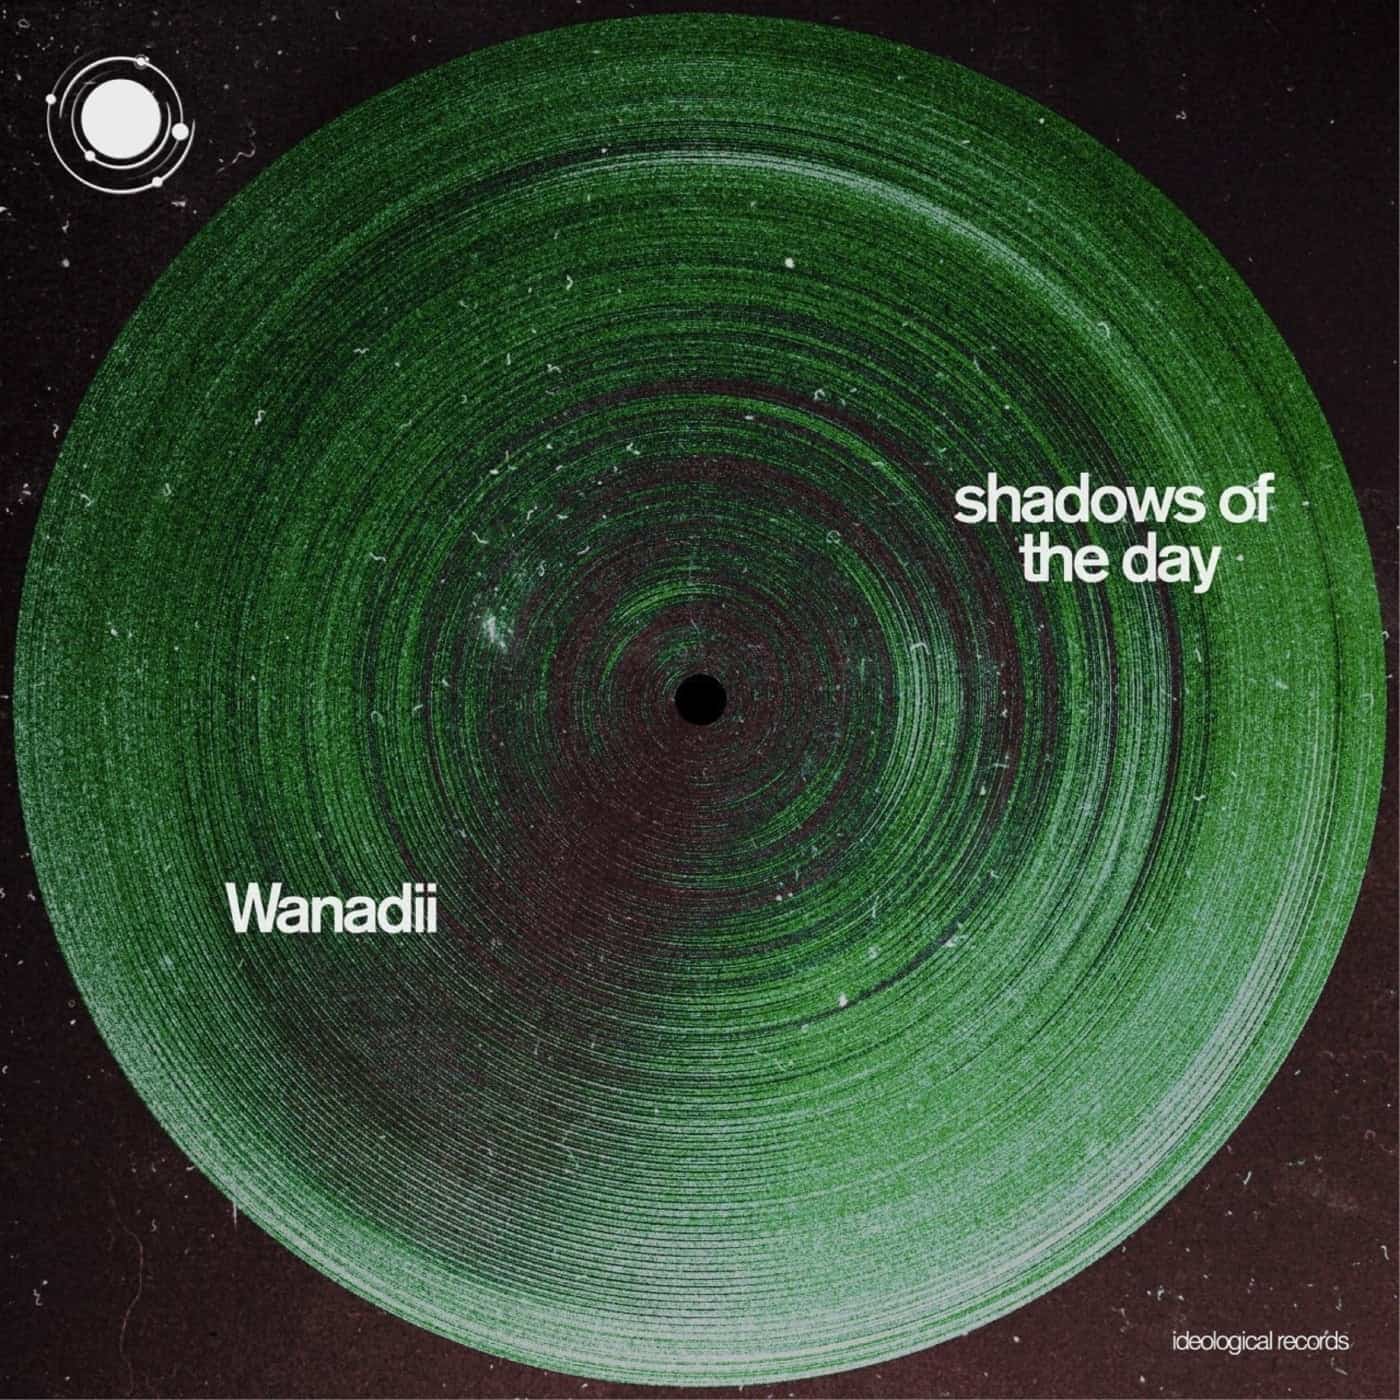 image cover: Wanadii - Shadows of the Day / IDE025